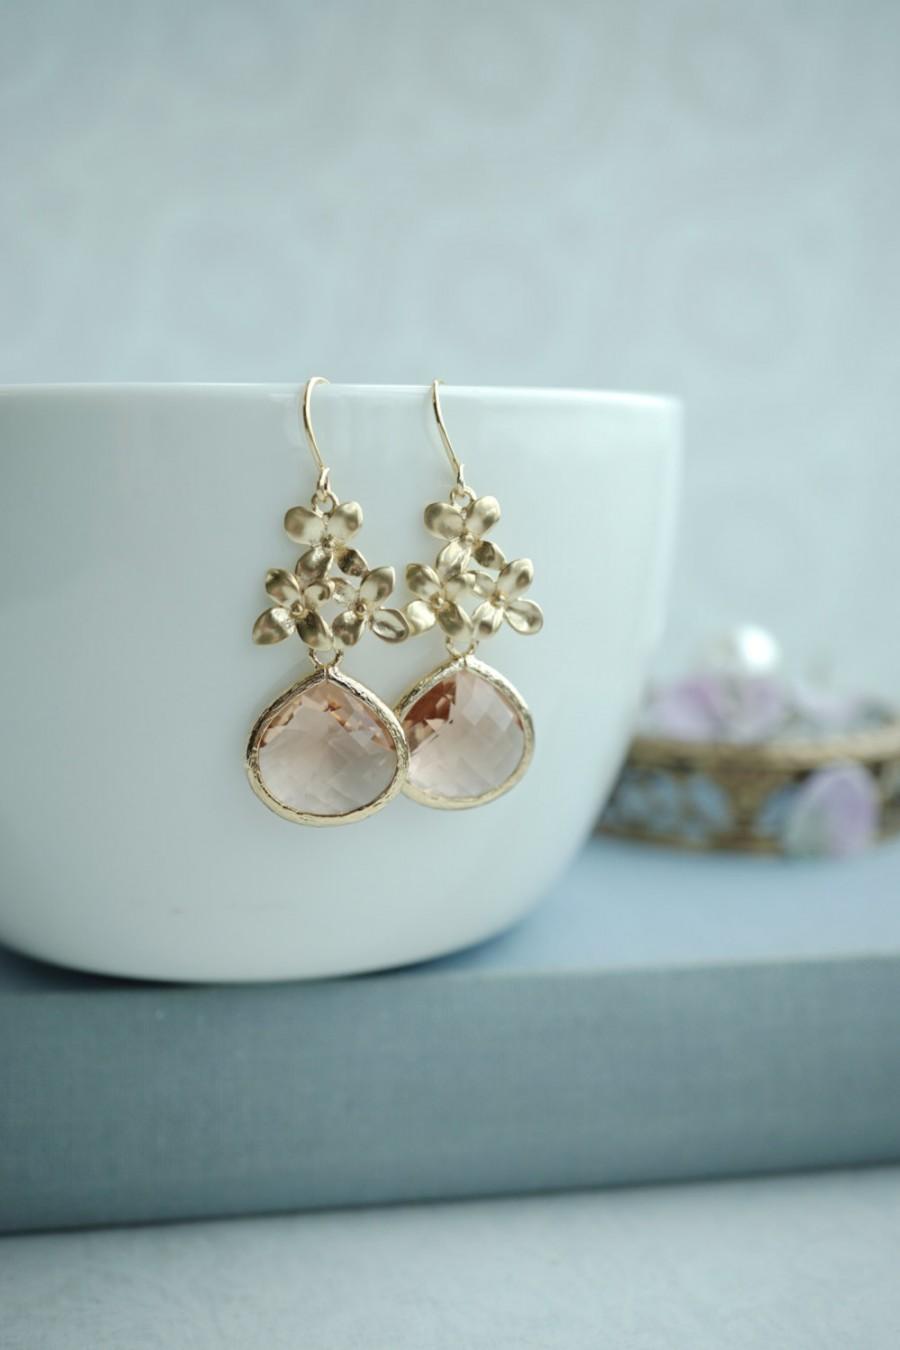 Mariage - Champagne Peach Earrings, Gold Champagne Flower Earrings, Bridesmaids Gift, Mothers Day, Cherry Blossom Dangle Earrings, Wife Valentine Gift